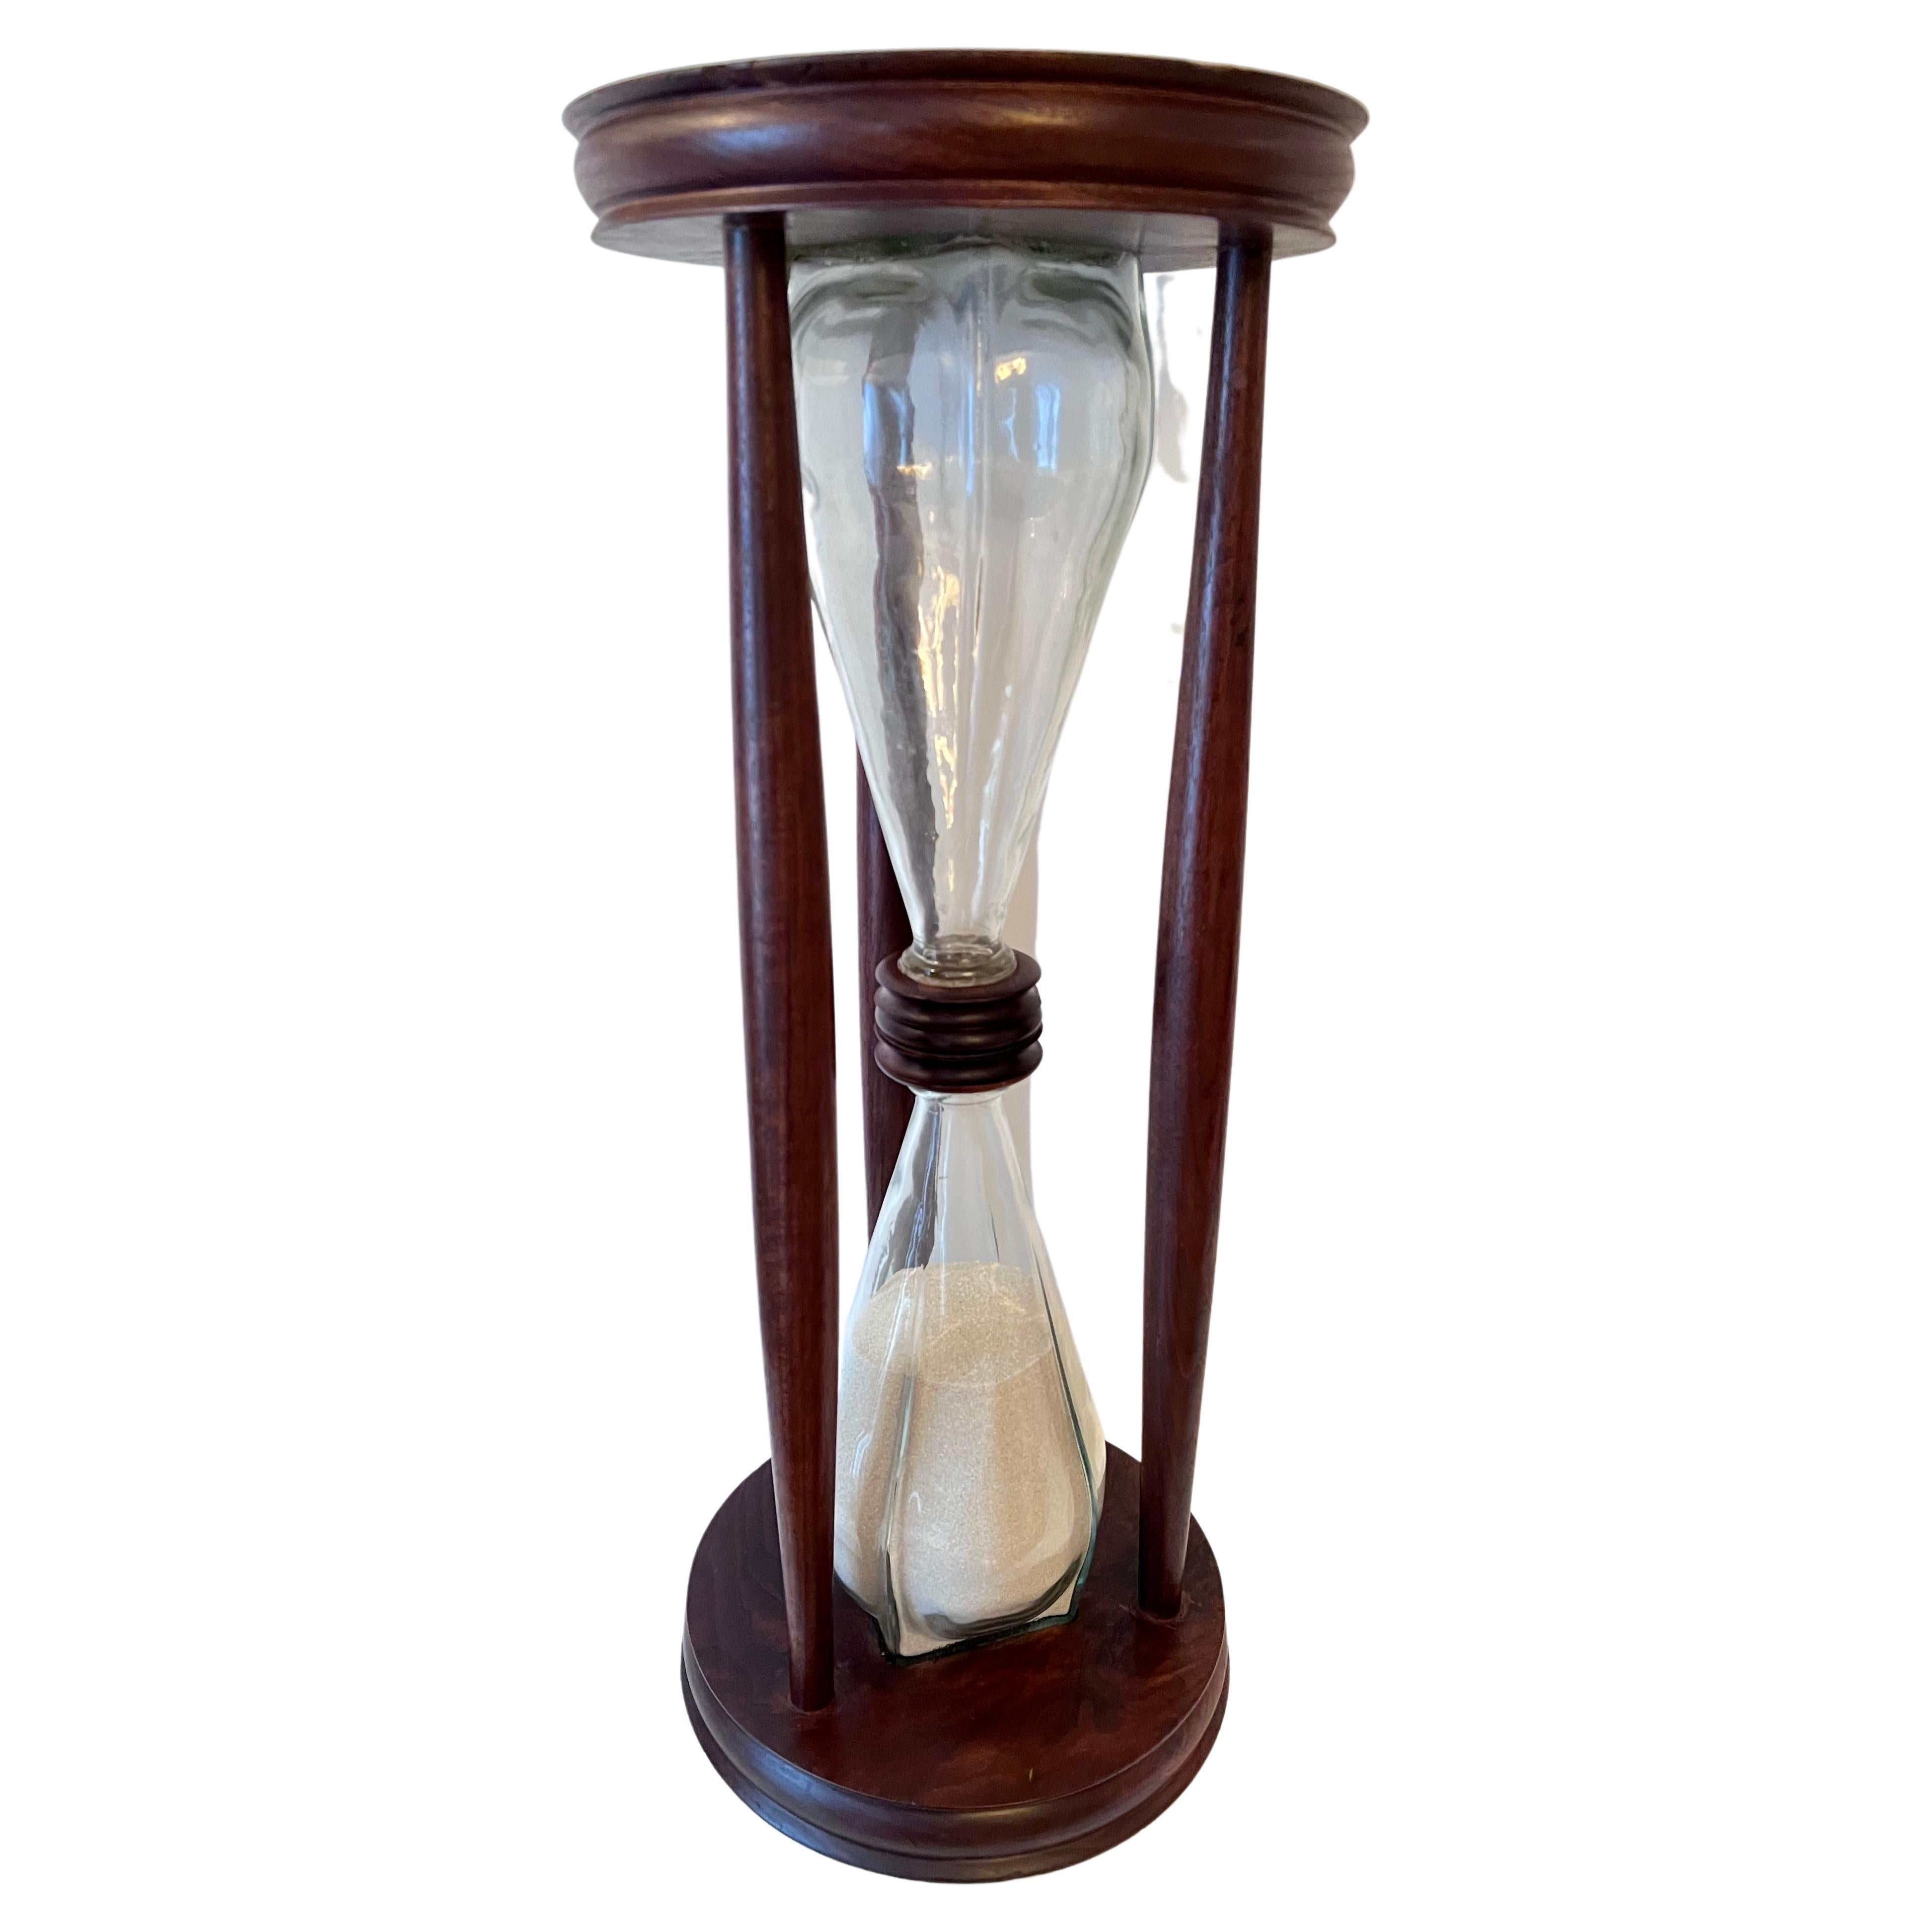 Hour Glass or Sand Timer of solid wood frame, in Mahogany or Walnut. The piece is a compliment to any space and because of its clean lines and angular glass would be spectacular in a modern home. 

The sand flows nicely and we are not sure of the